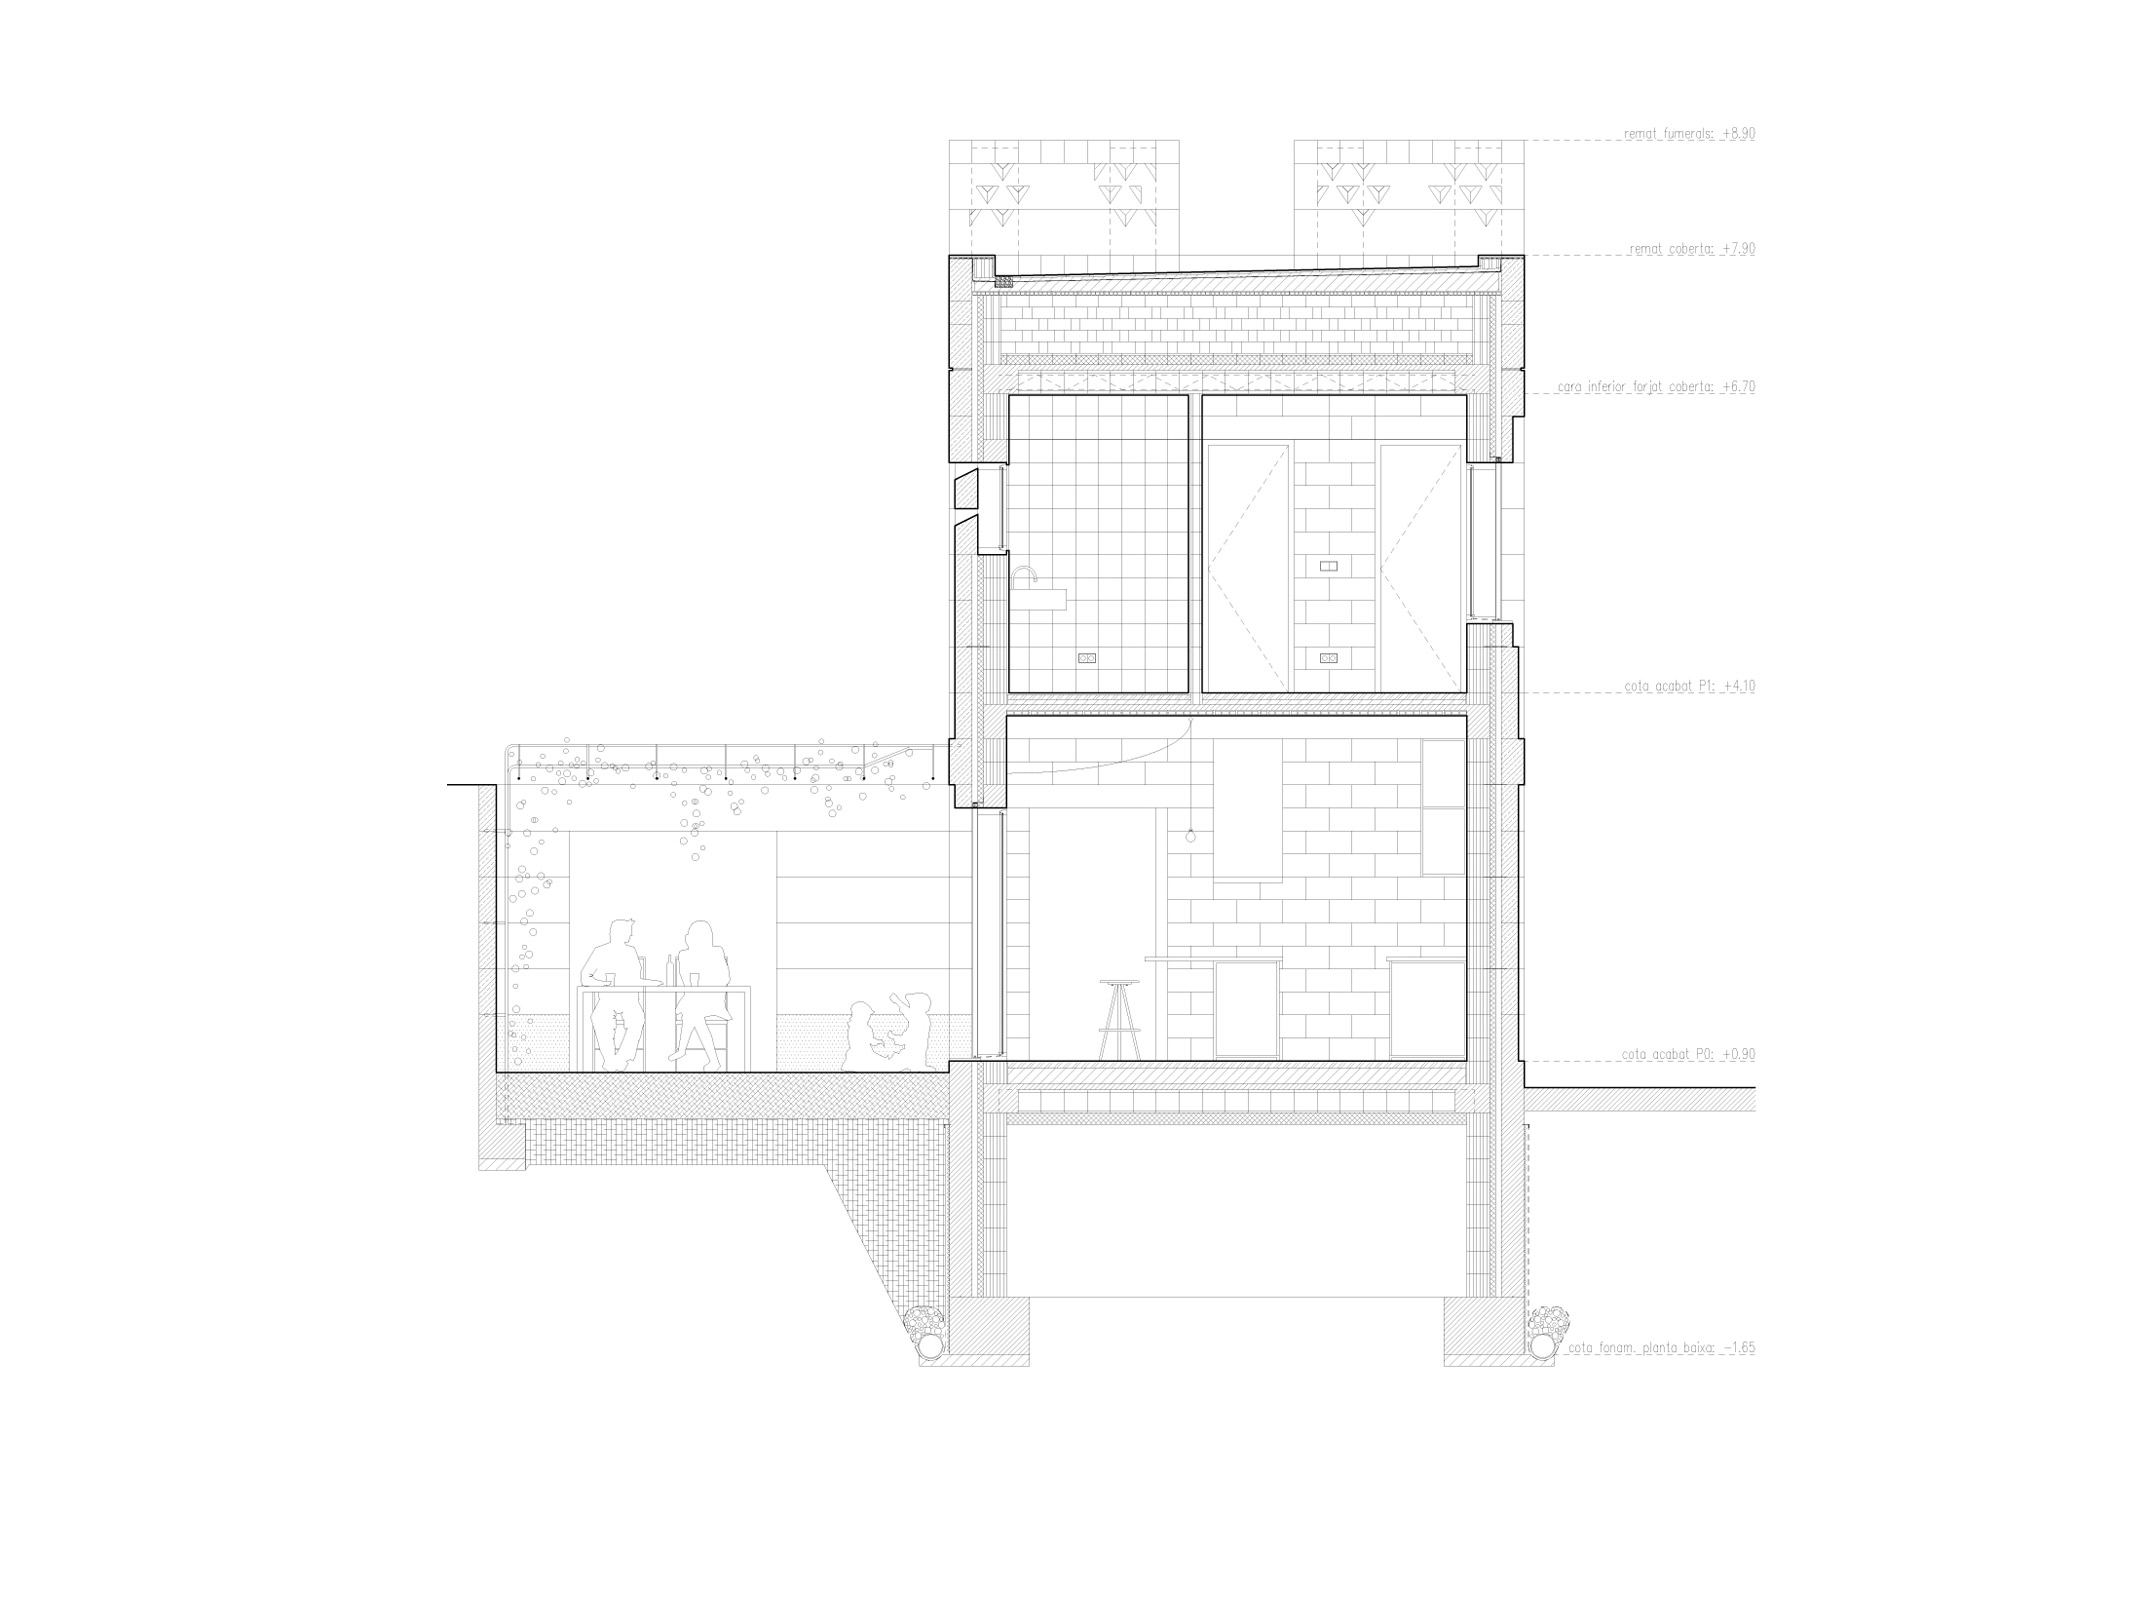 Image of 20230228 TEdA Guillem Plans 3 in Guillem and Cati's home - Cosentino